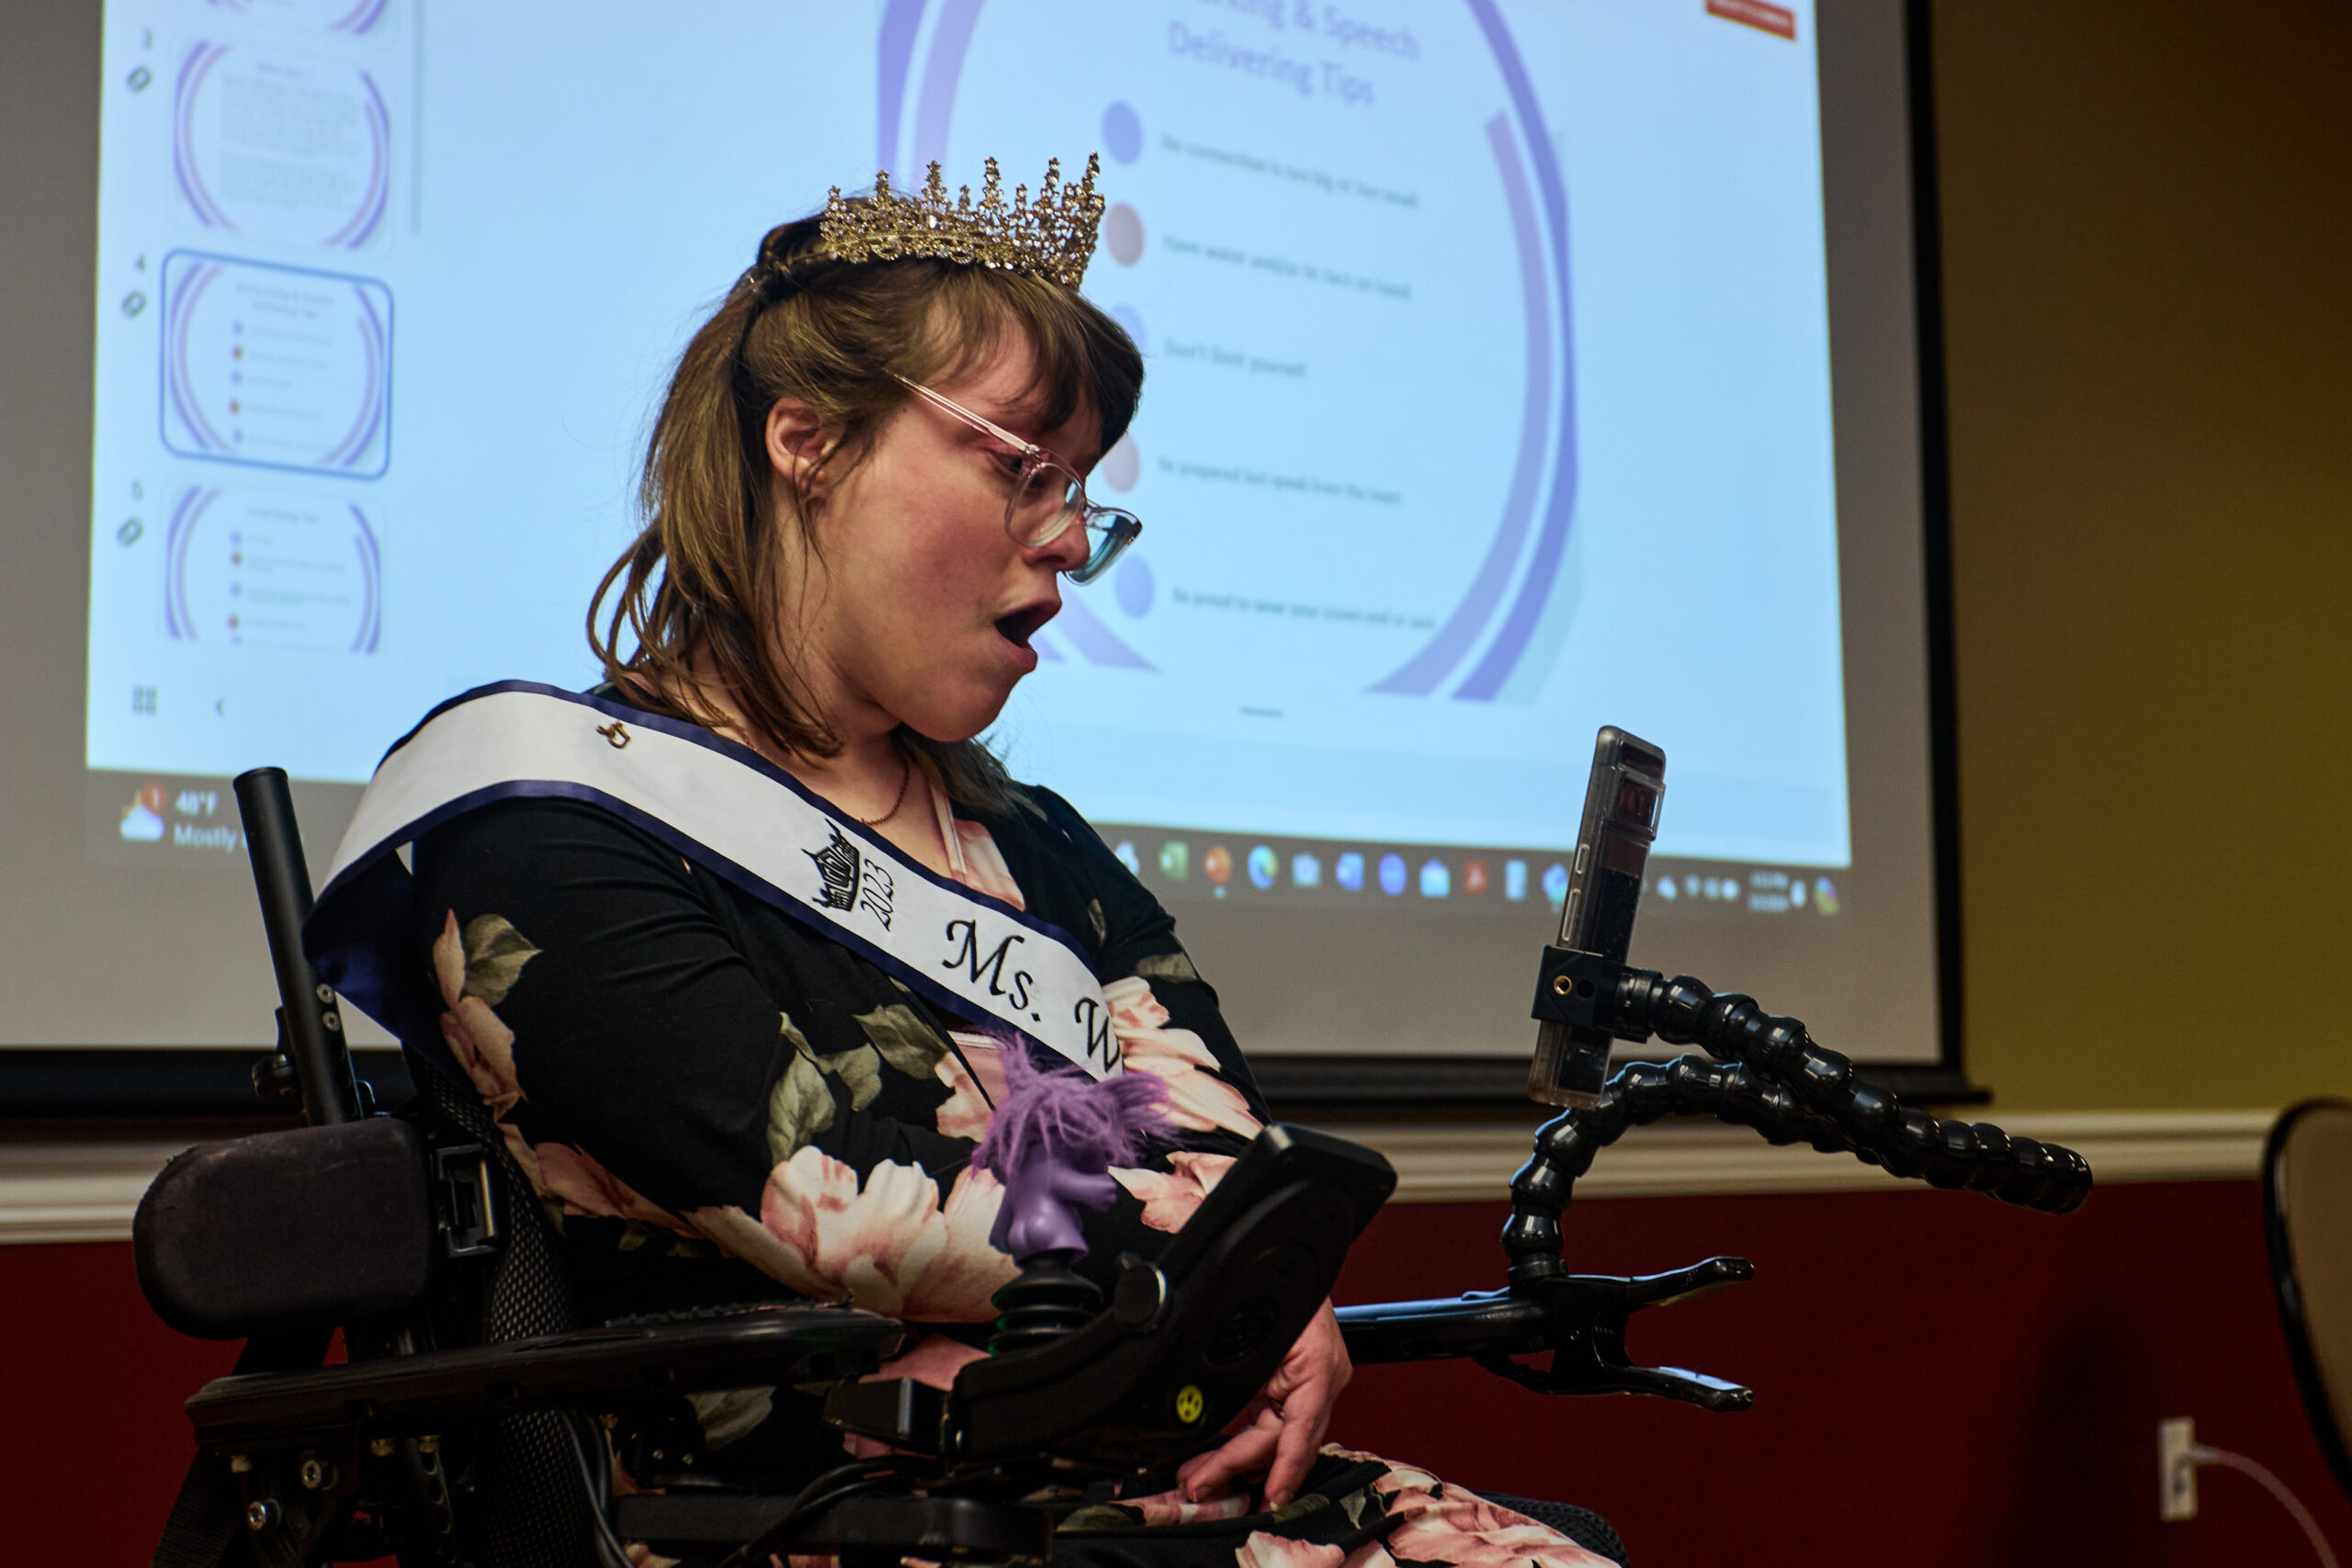 [Image description: Former Ms. Wheelchair Ohio 2023, Allison Boot, wearing her sash and crown, sitting in front of a screen projecting tips for the 2024 contestants.]

